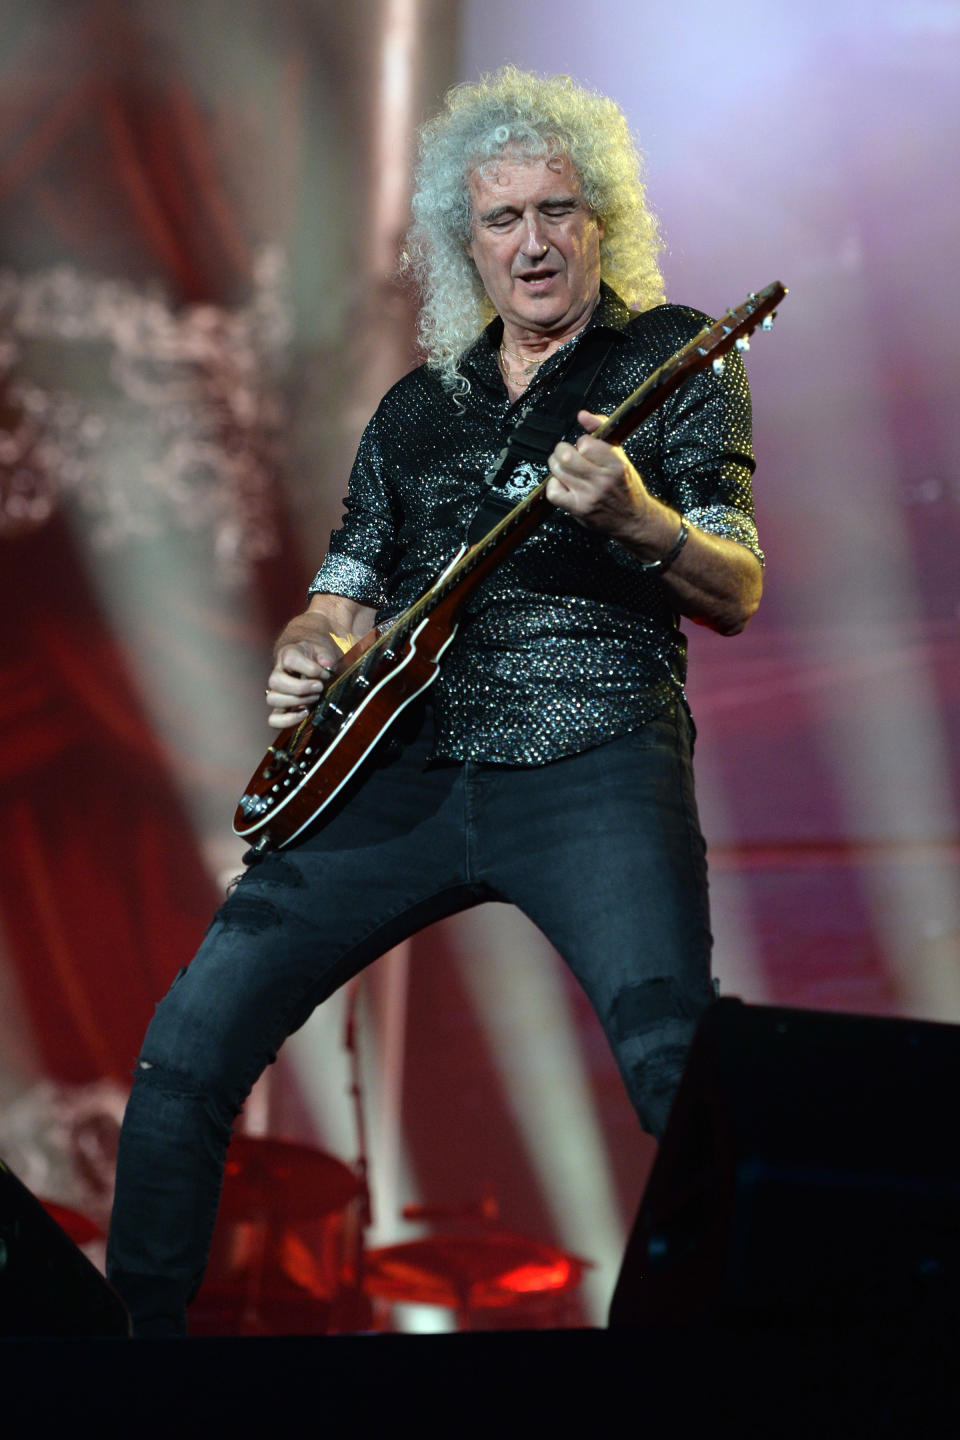 Lead guitarist Brian May of Queen performs during the 2019 Global Citizen Festival on the Great Lawn of Central Park, in New York, NY, September 28, 2019. Global Citizens Festival is aimed at bringing awareness for world leaders to empower women, combat plastic pollution, fght Infectious diseases, and build global human capital. (Photo by Anthony Behar/Sipa USA)